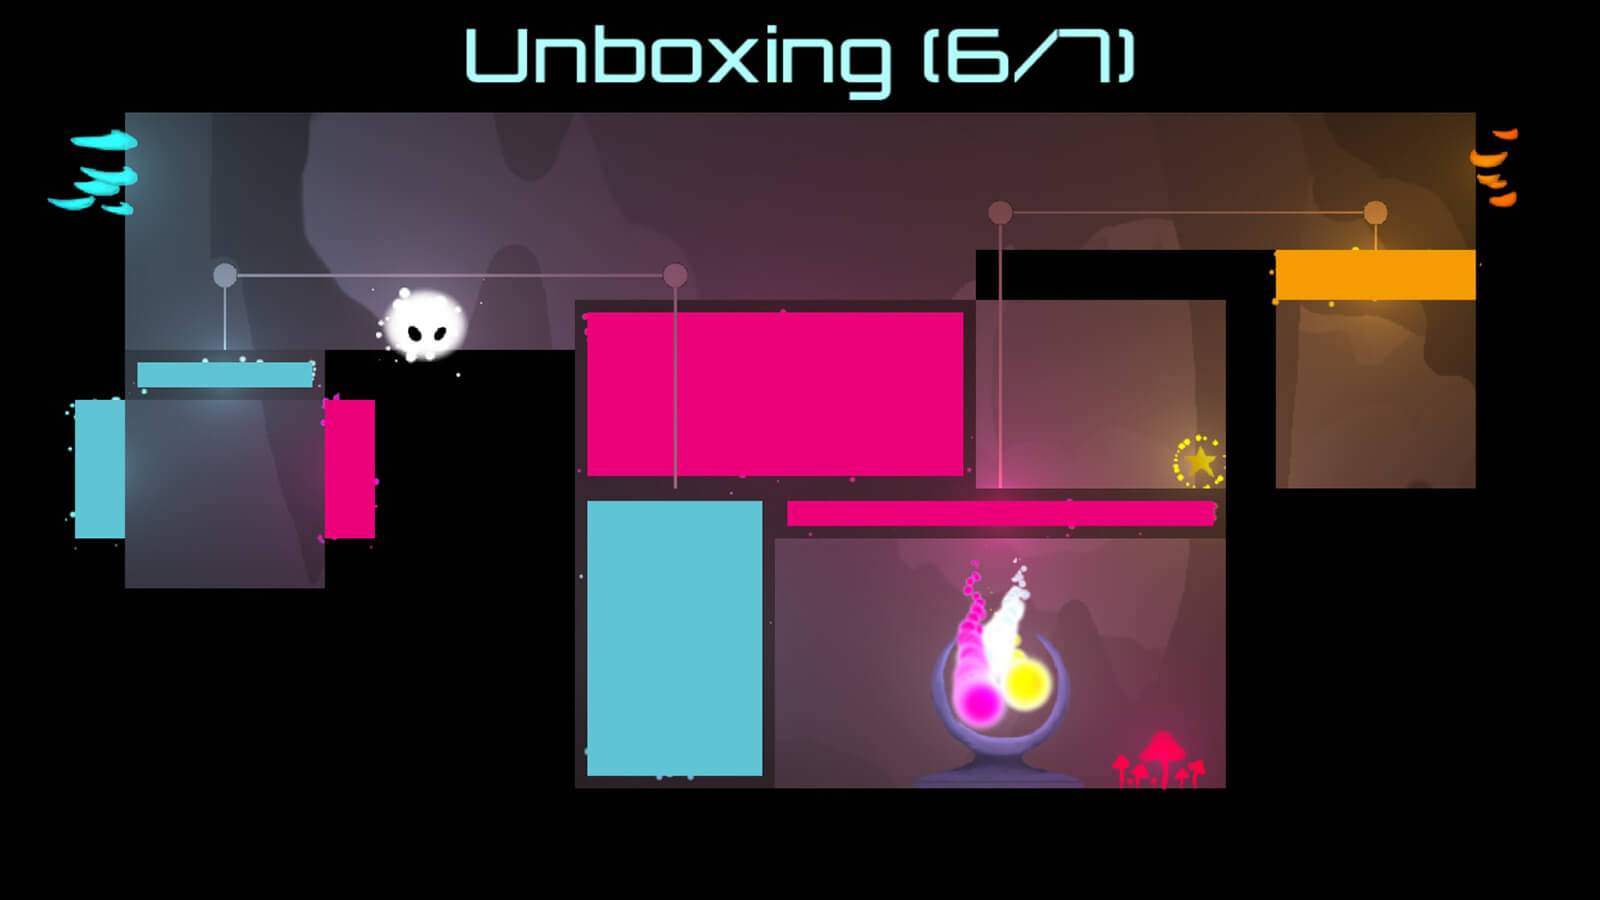 A glowing white orb with eyes traverses a stage of blue and pink platforms. The level is titles "Unboxing 6/7."